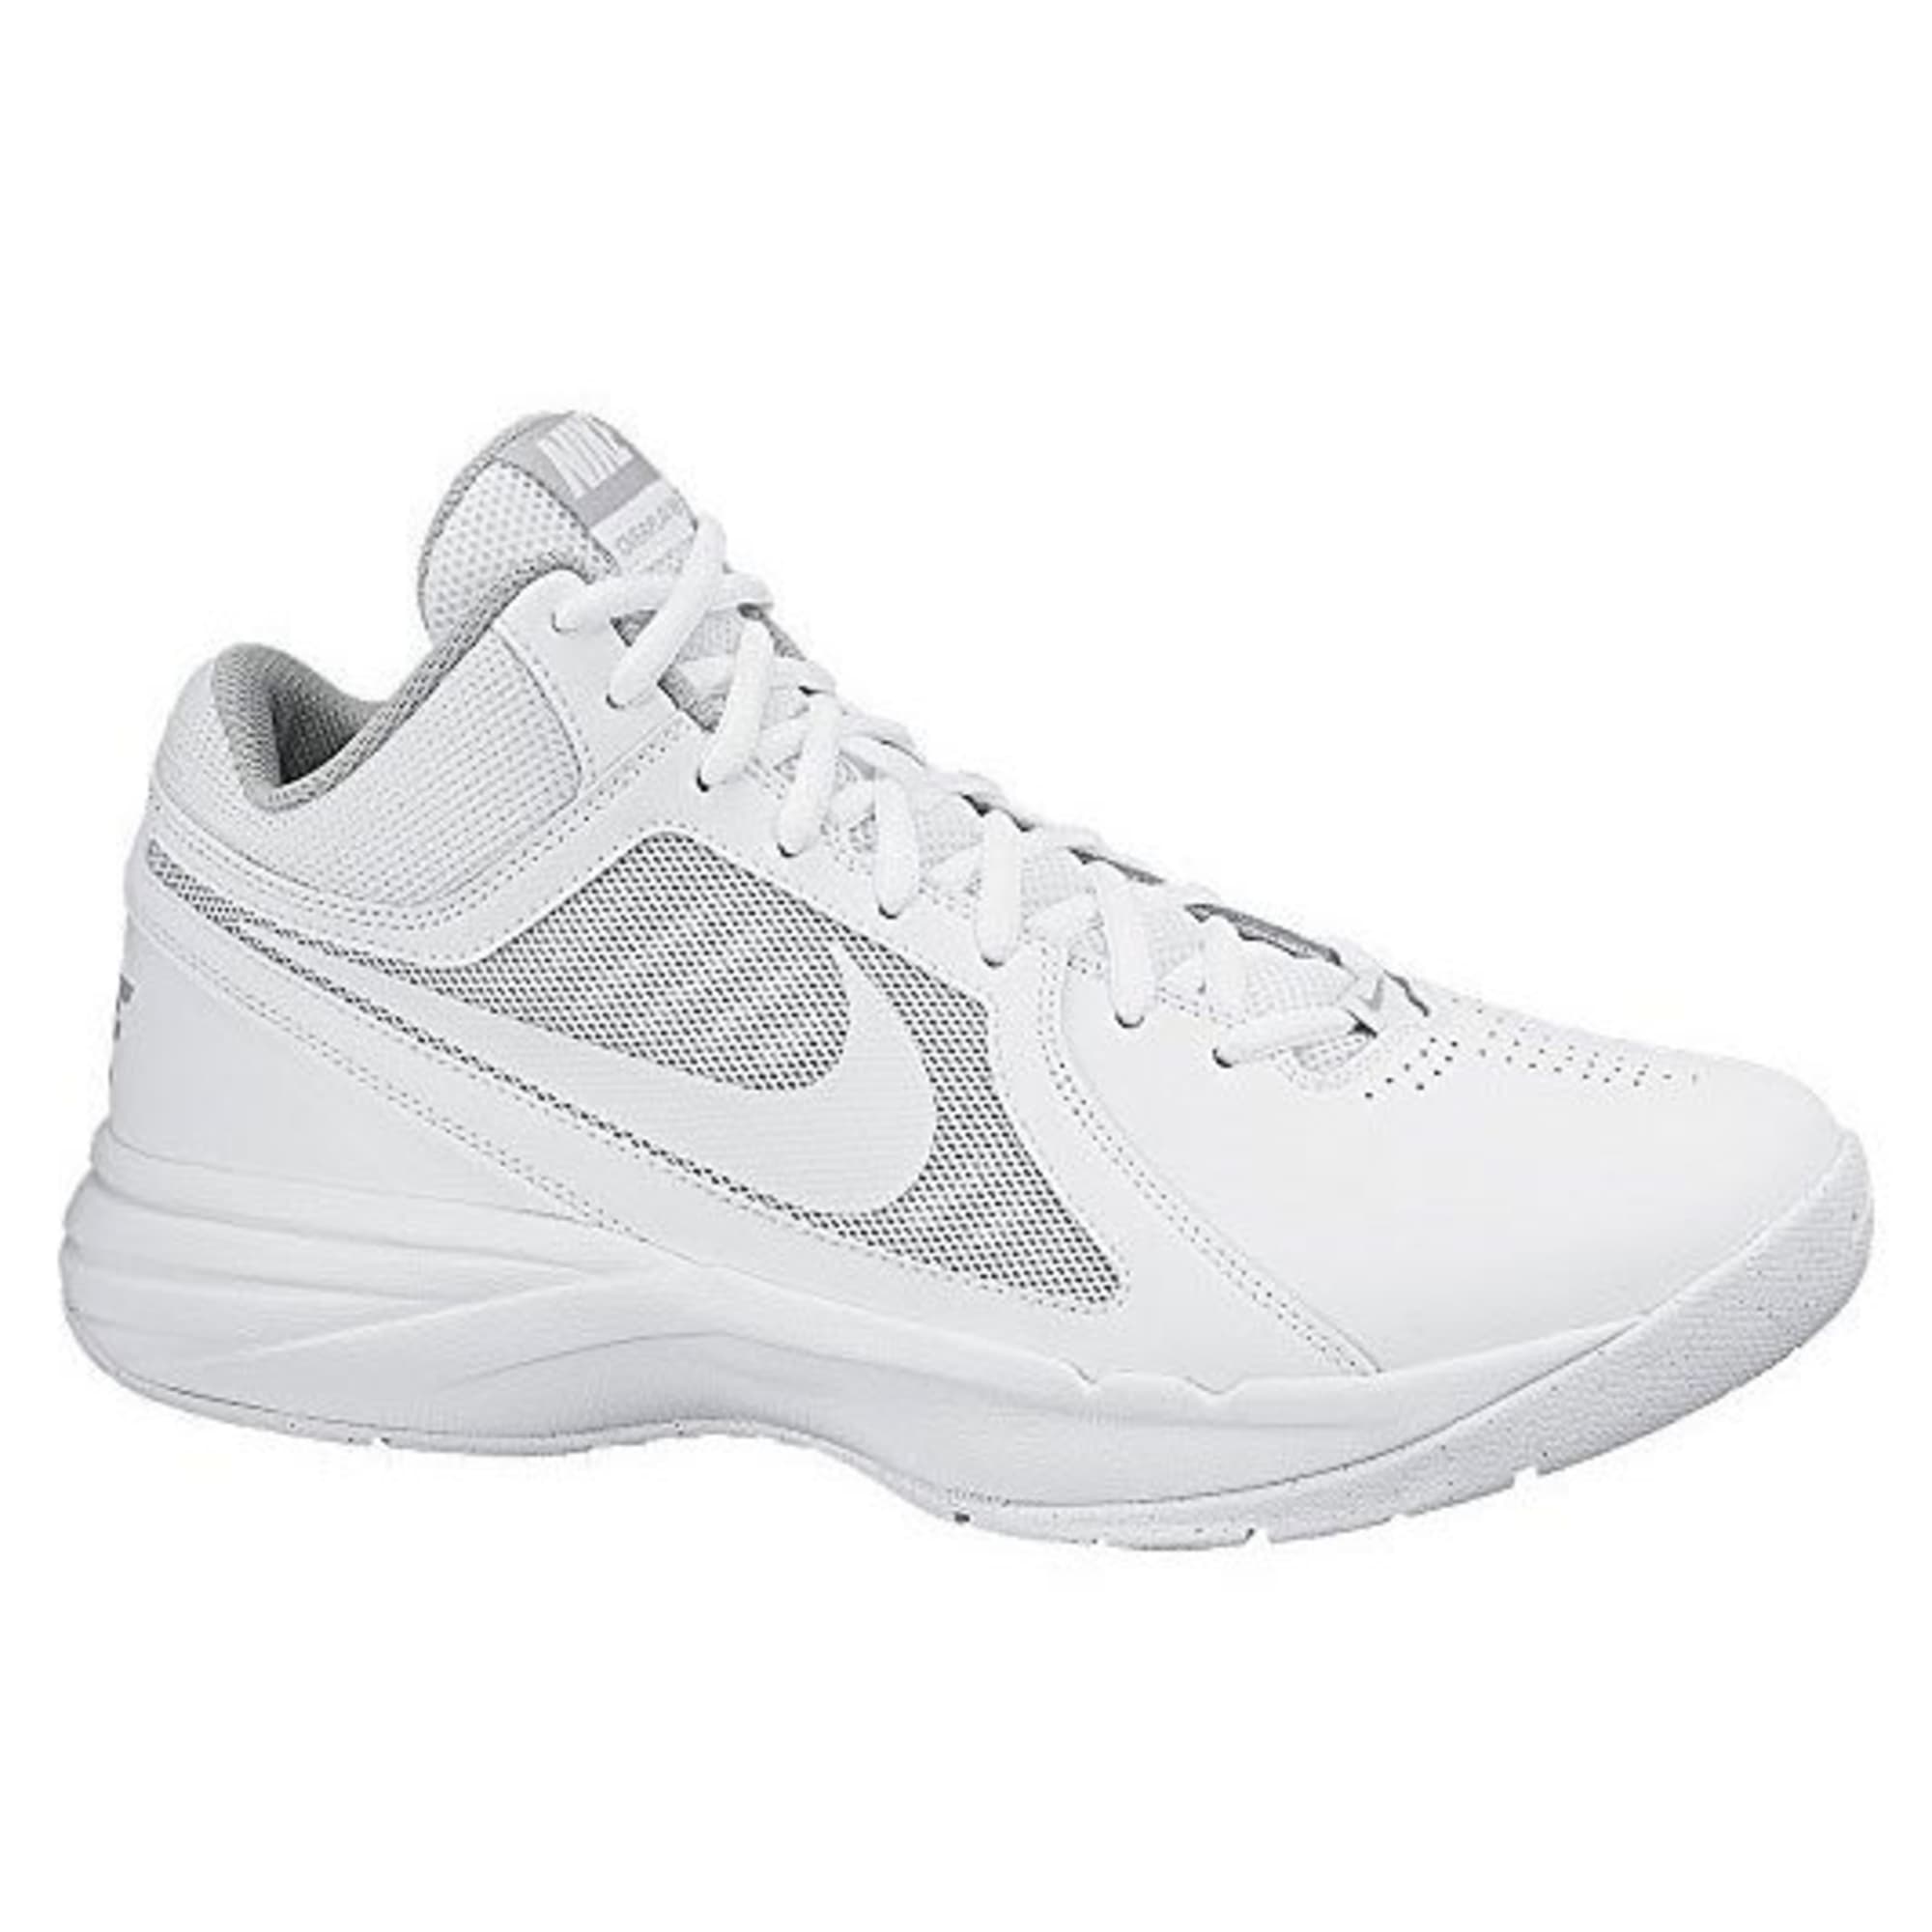 NIKE Men's The Overplay VIII Basketball Shoes - Bob's Stores